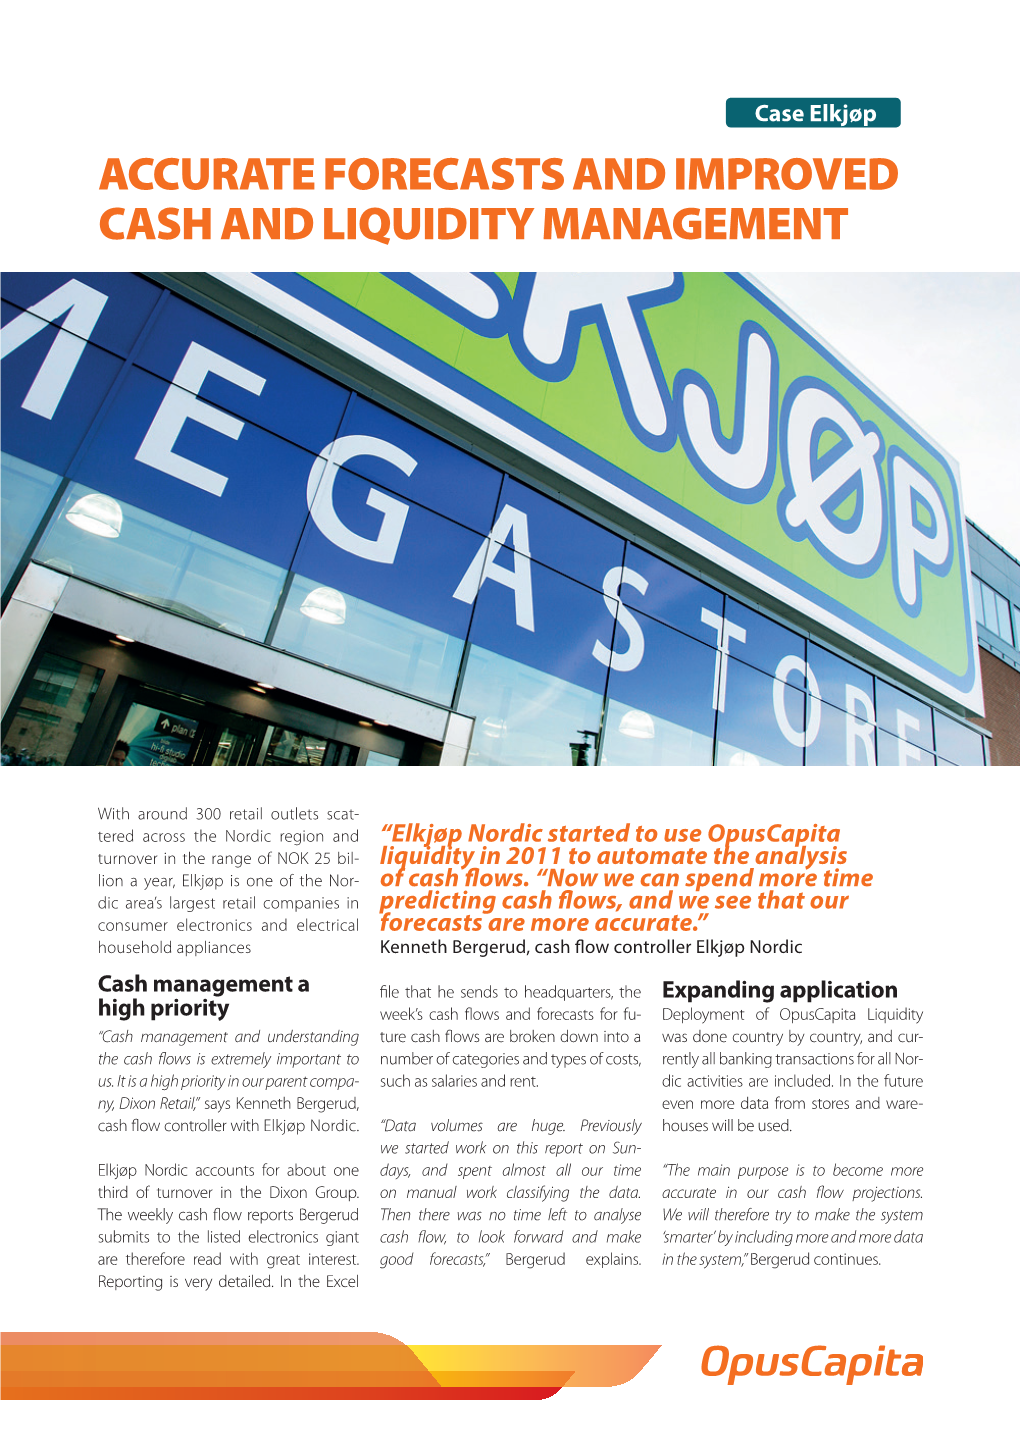 Accurate Forecasts and Improved Cash and Liquidity Management